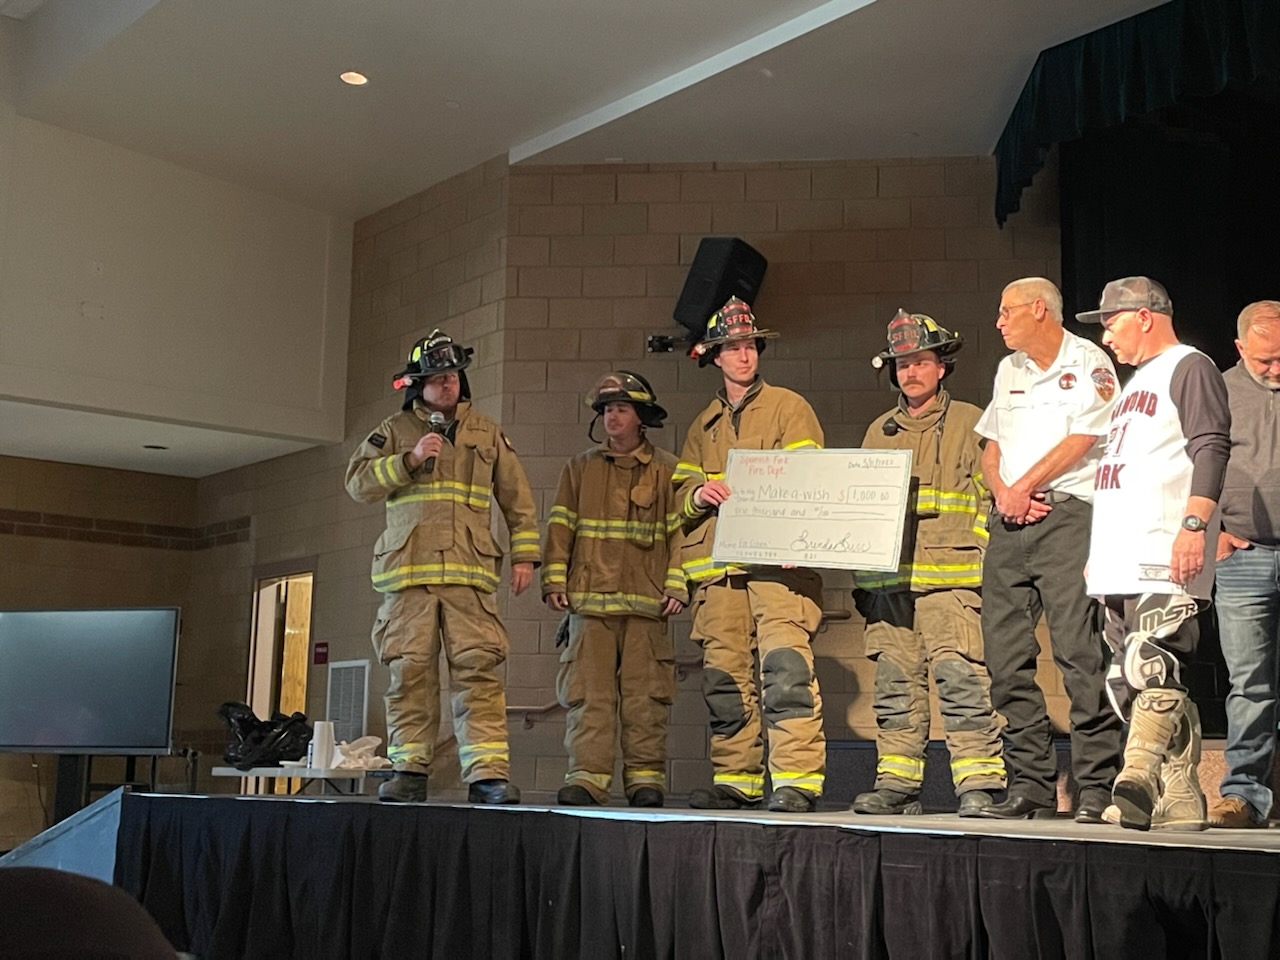 Spanish Fork Fire donating to the DFMS Make-A-Wish event